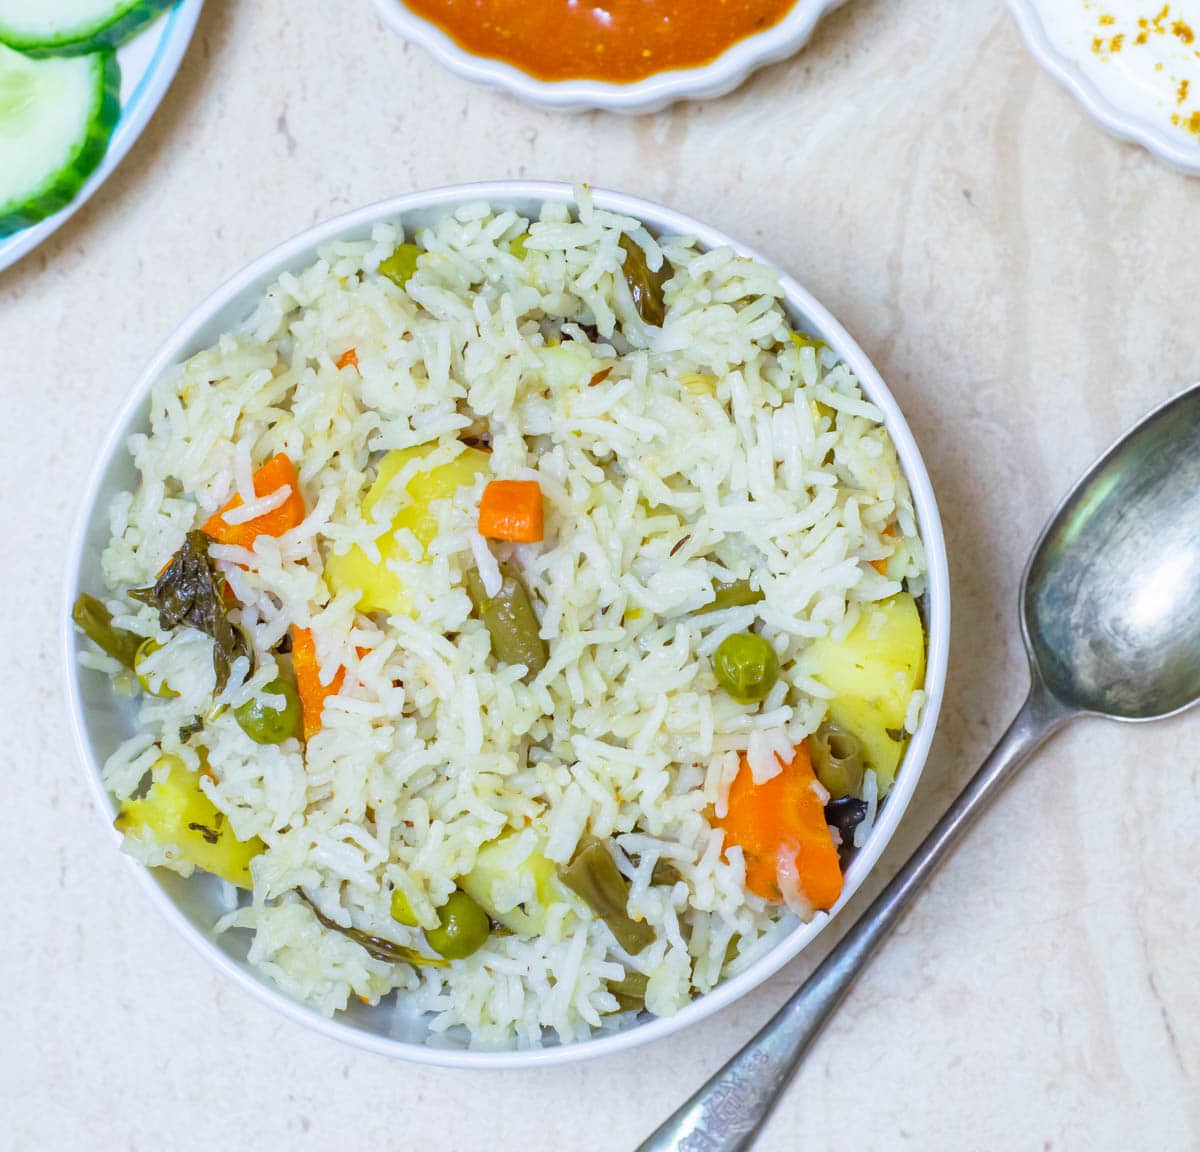 vegetable pulao in a white bowl placed on a tile along with a spoon, salad, curry and raita.